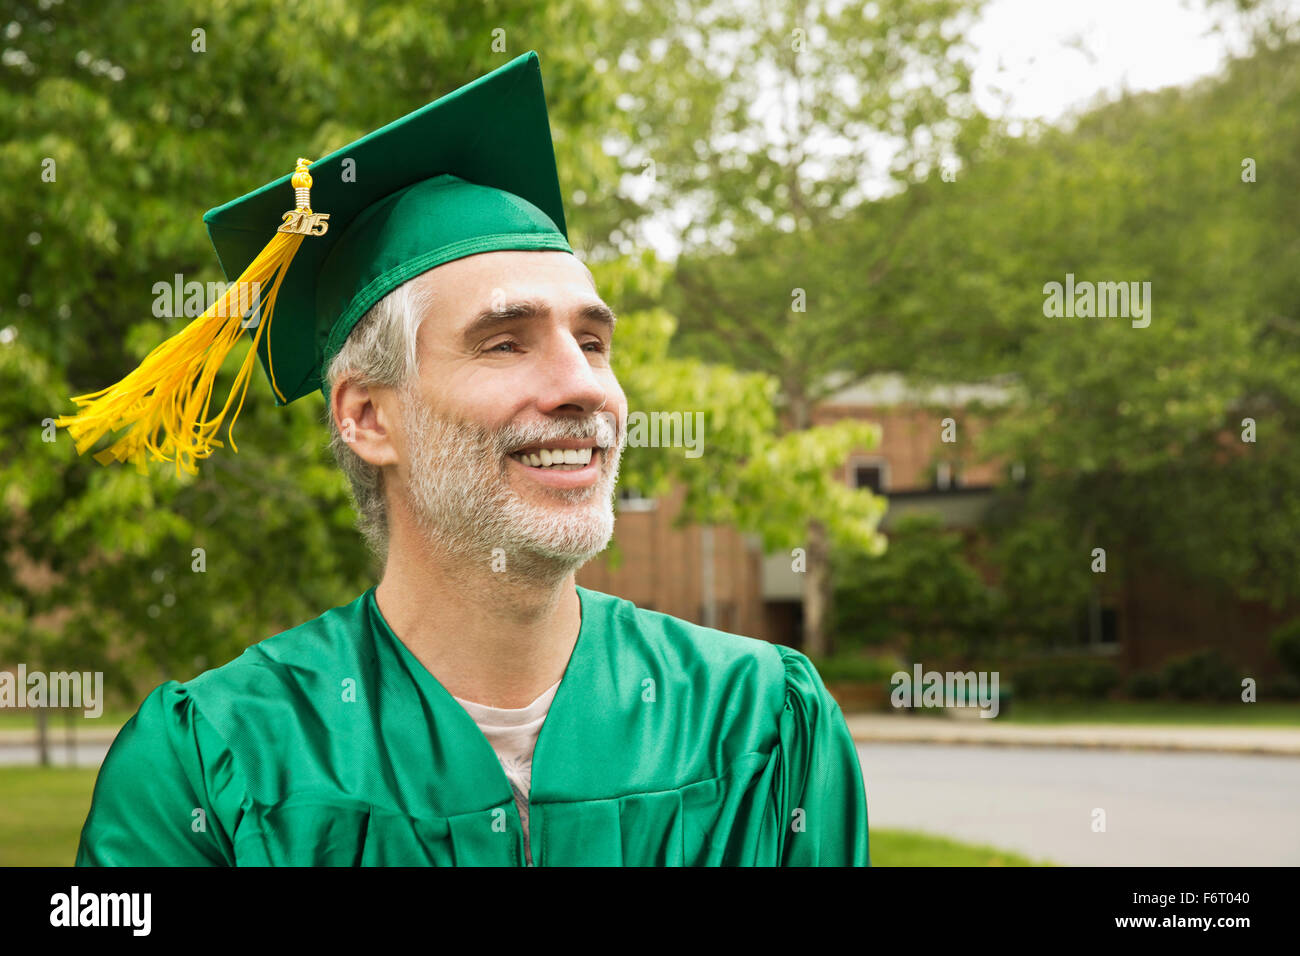 Caucasian college graduate wearing cap and gown Stock Photo